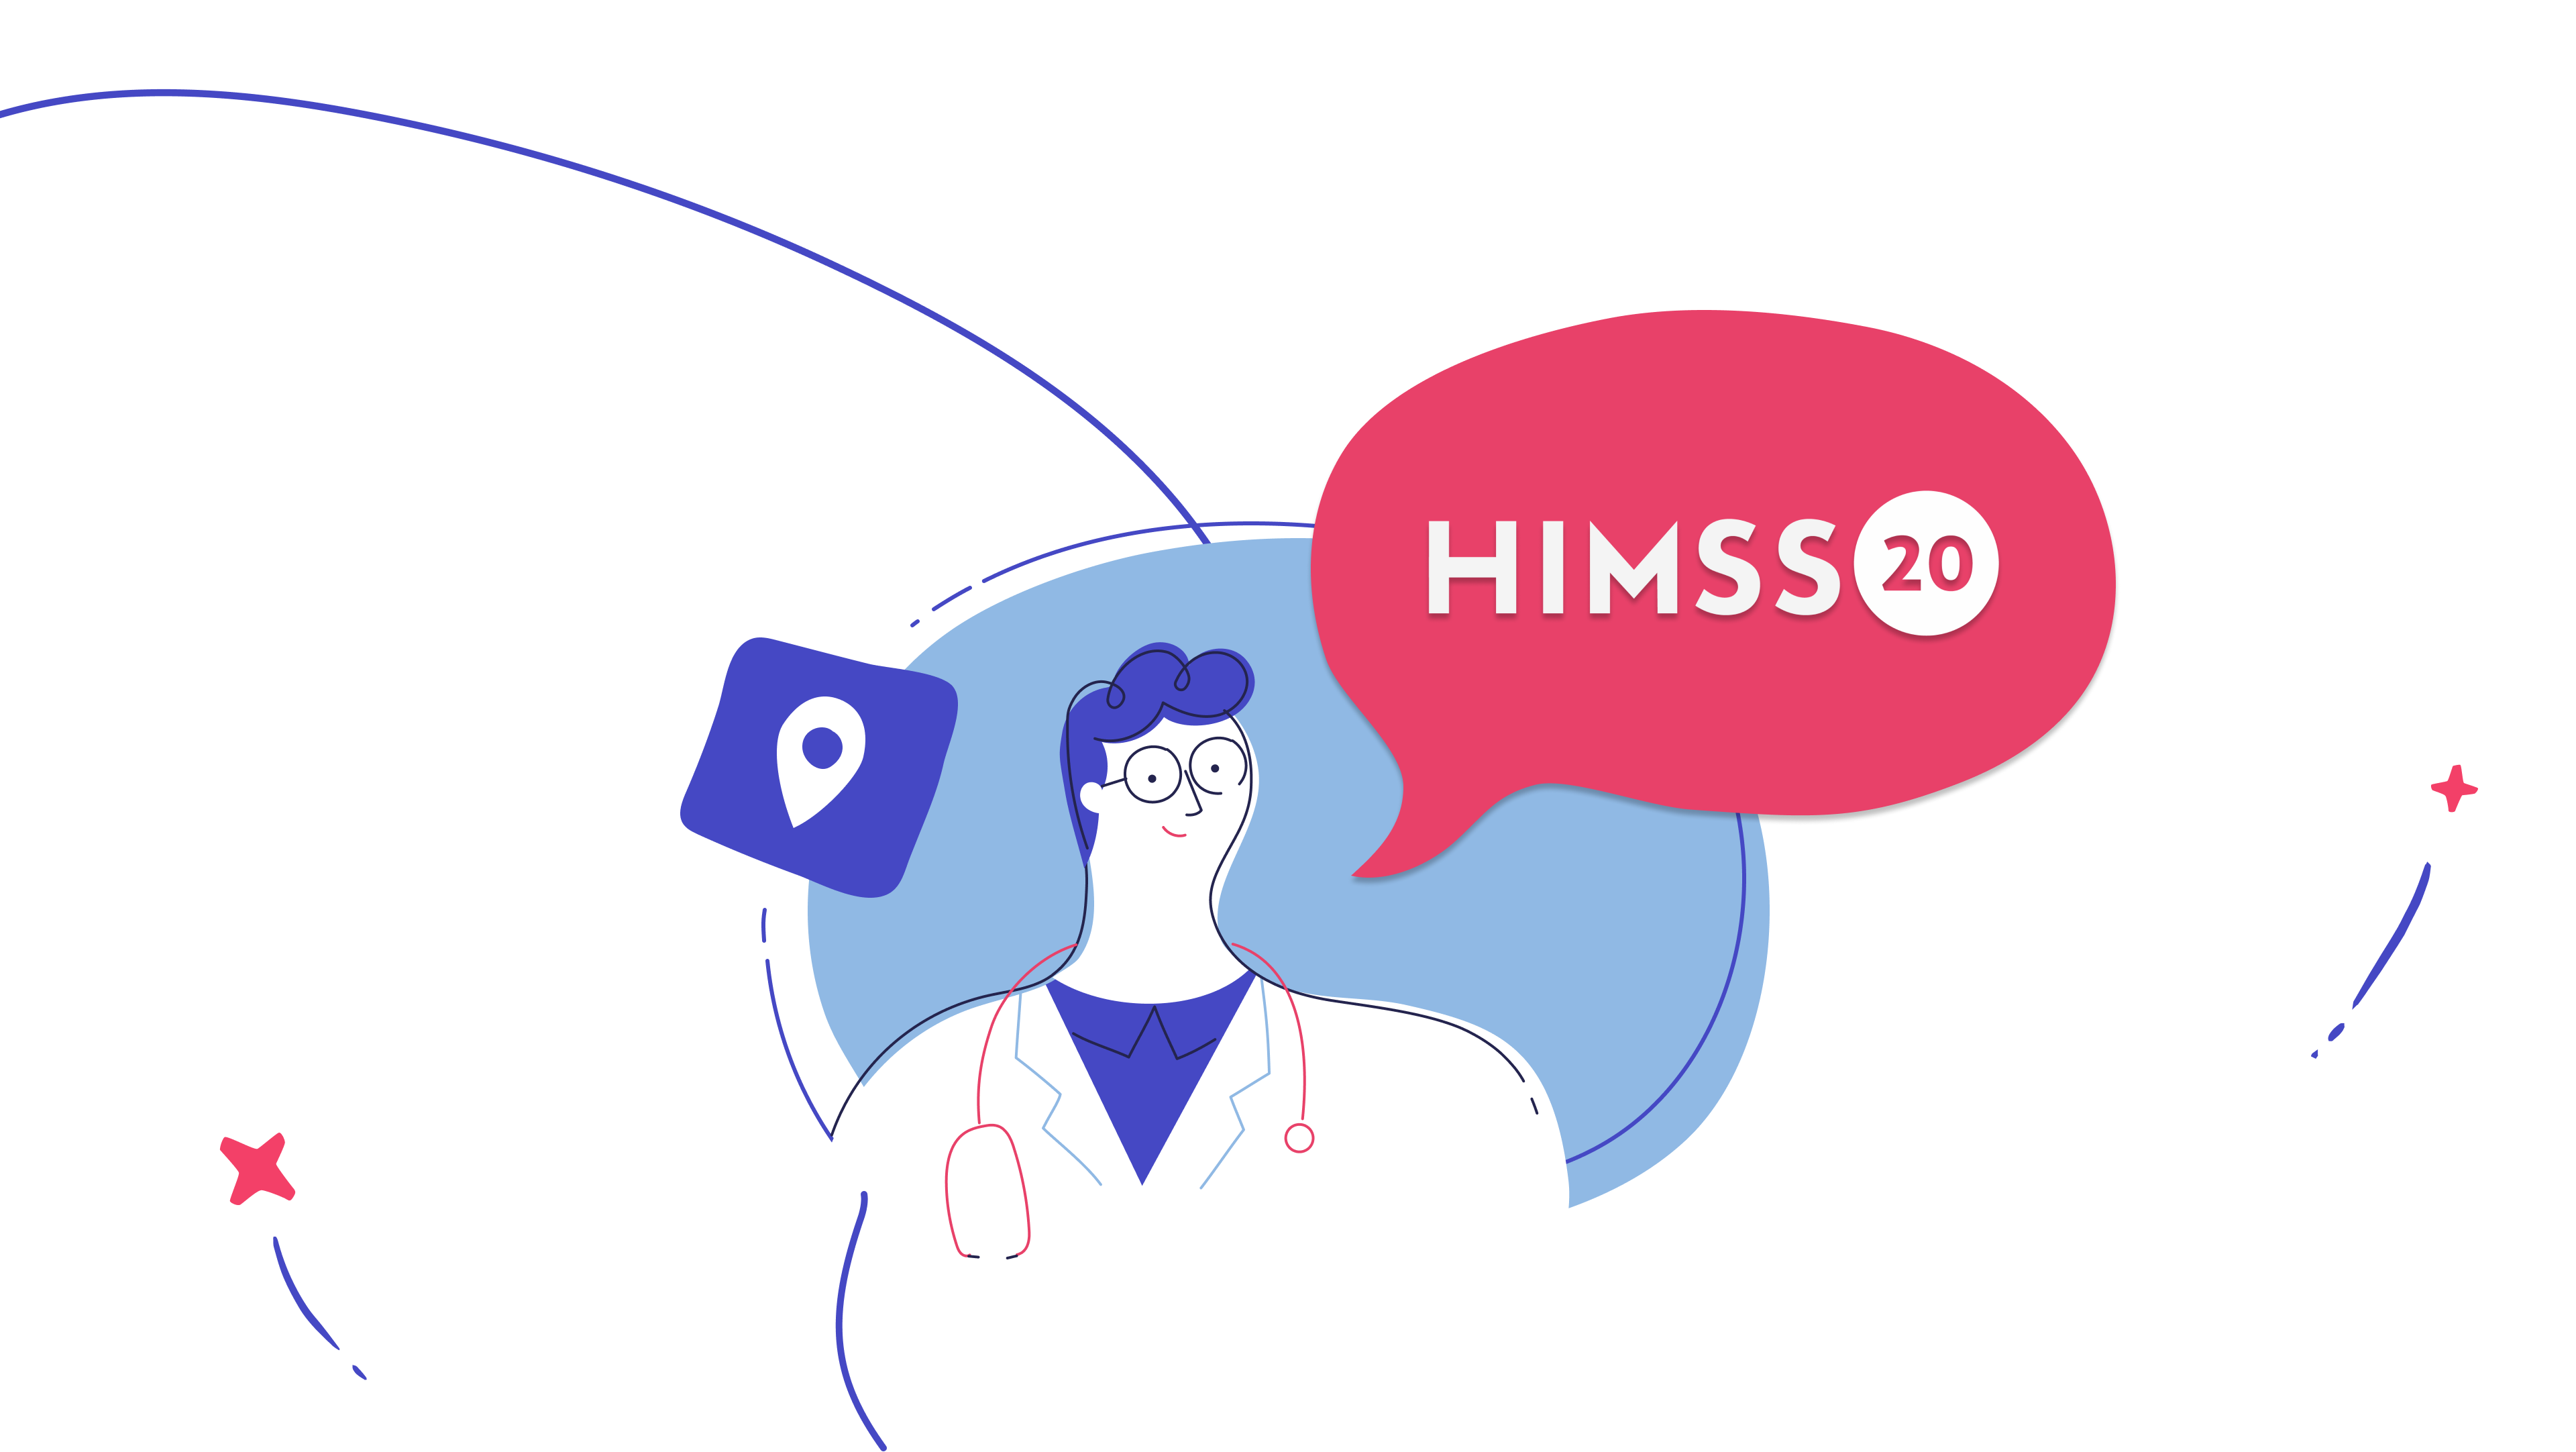 Key Topics from HIMSS that Dominated the 2010s